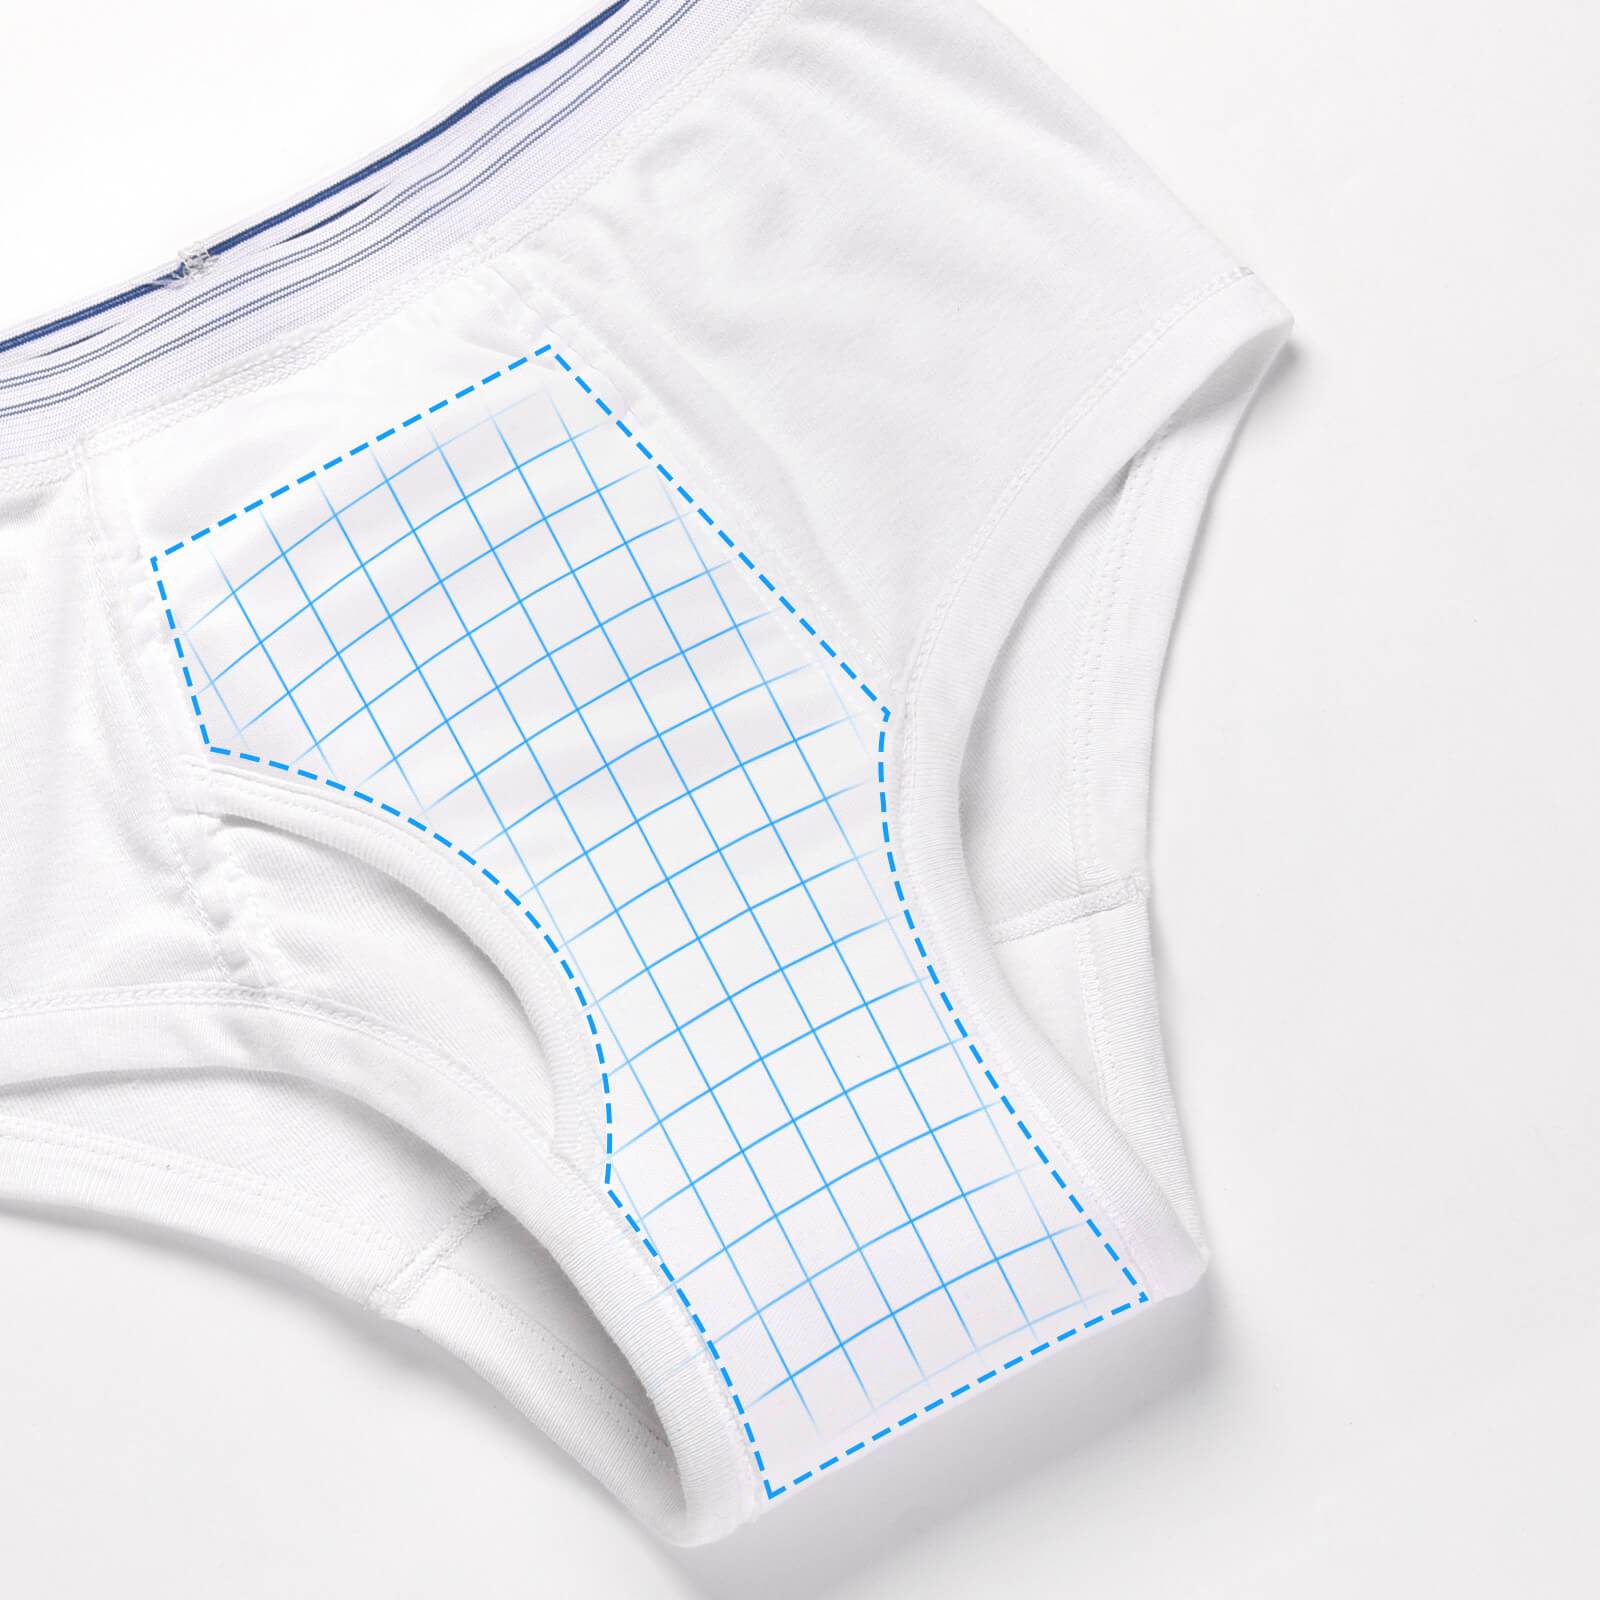 Washable Incontinence Underwear for Men Moderate Absorbency Briefs